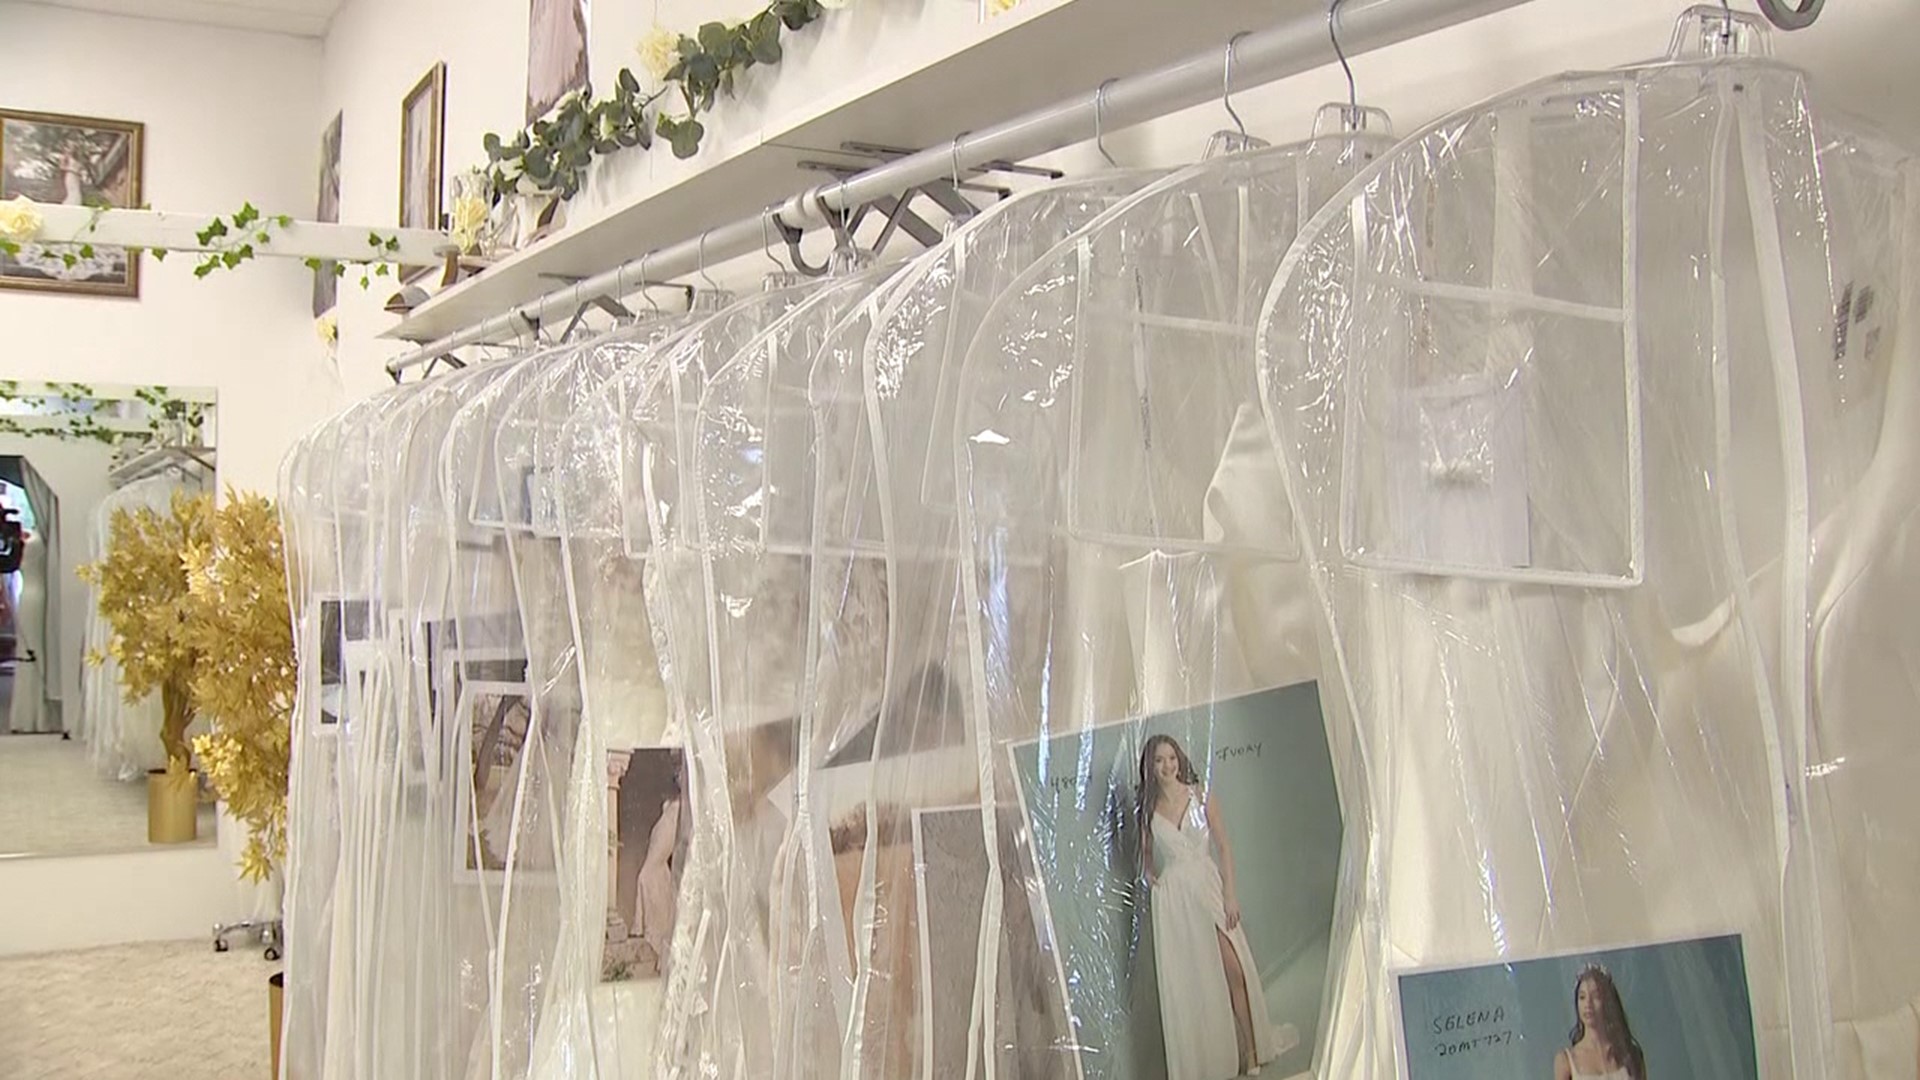 Elegant Bridal and Boutique will host its grand reopening on December 2nd.